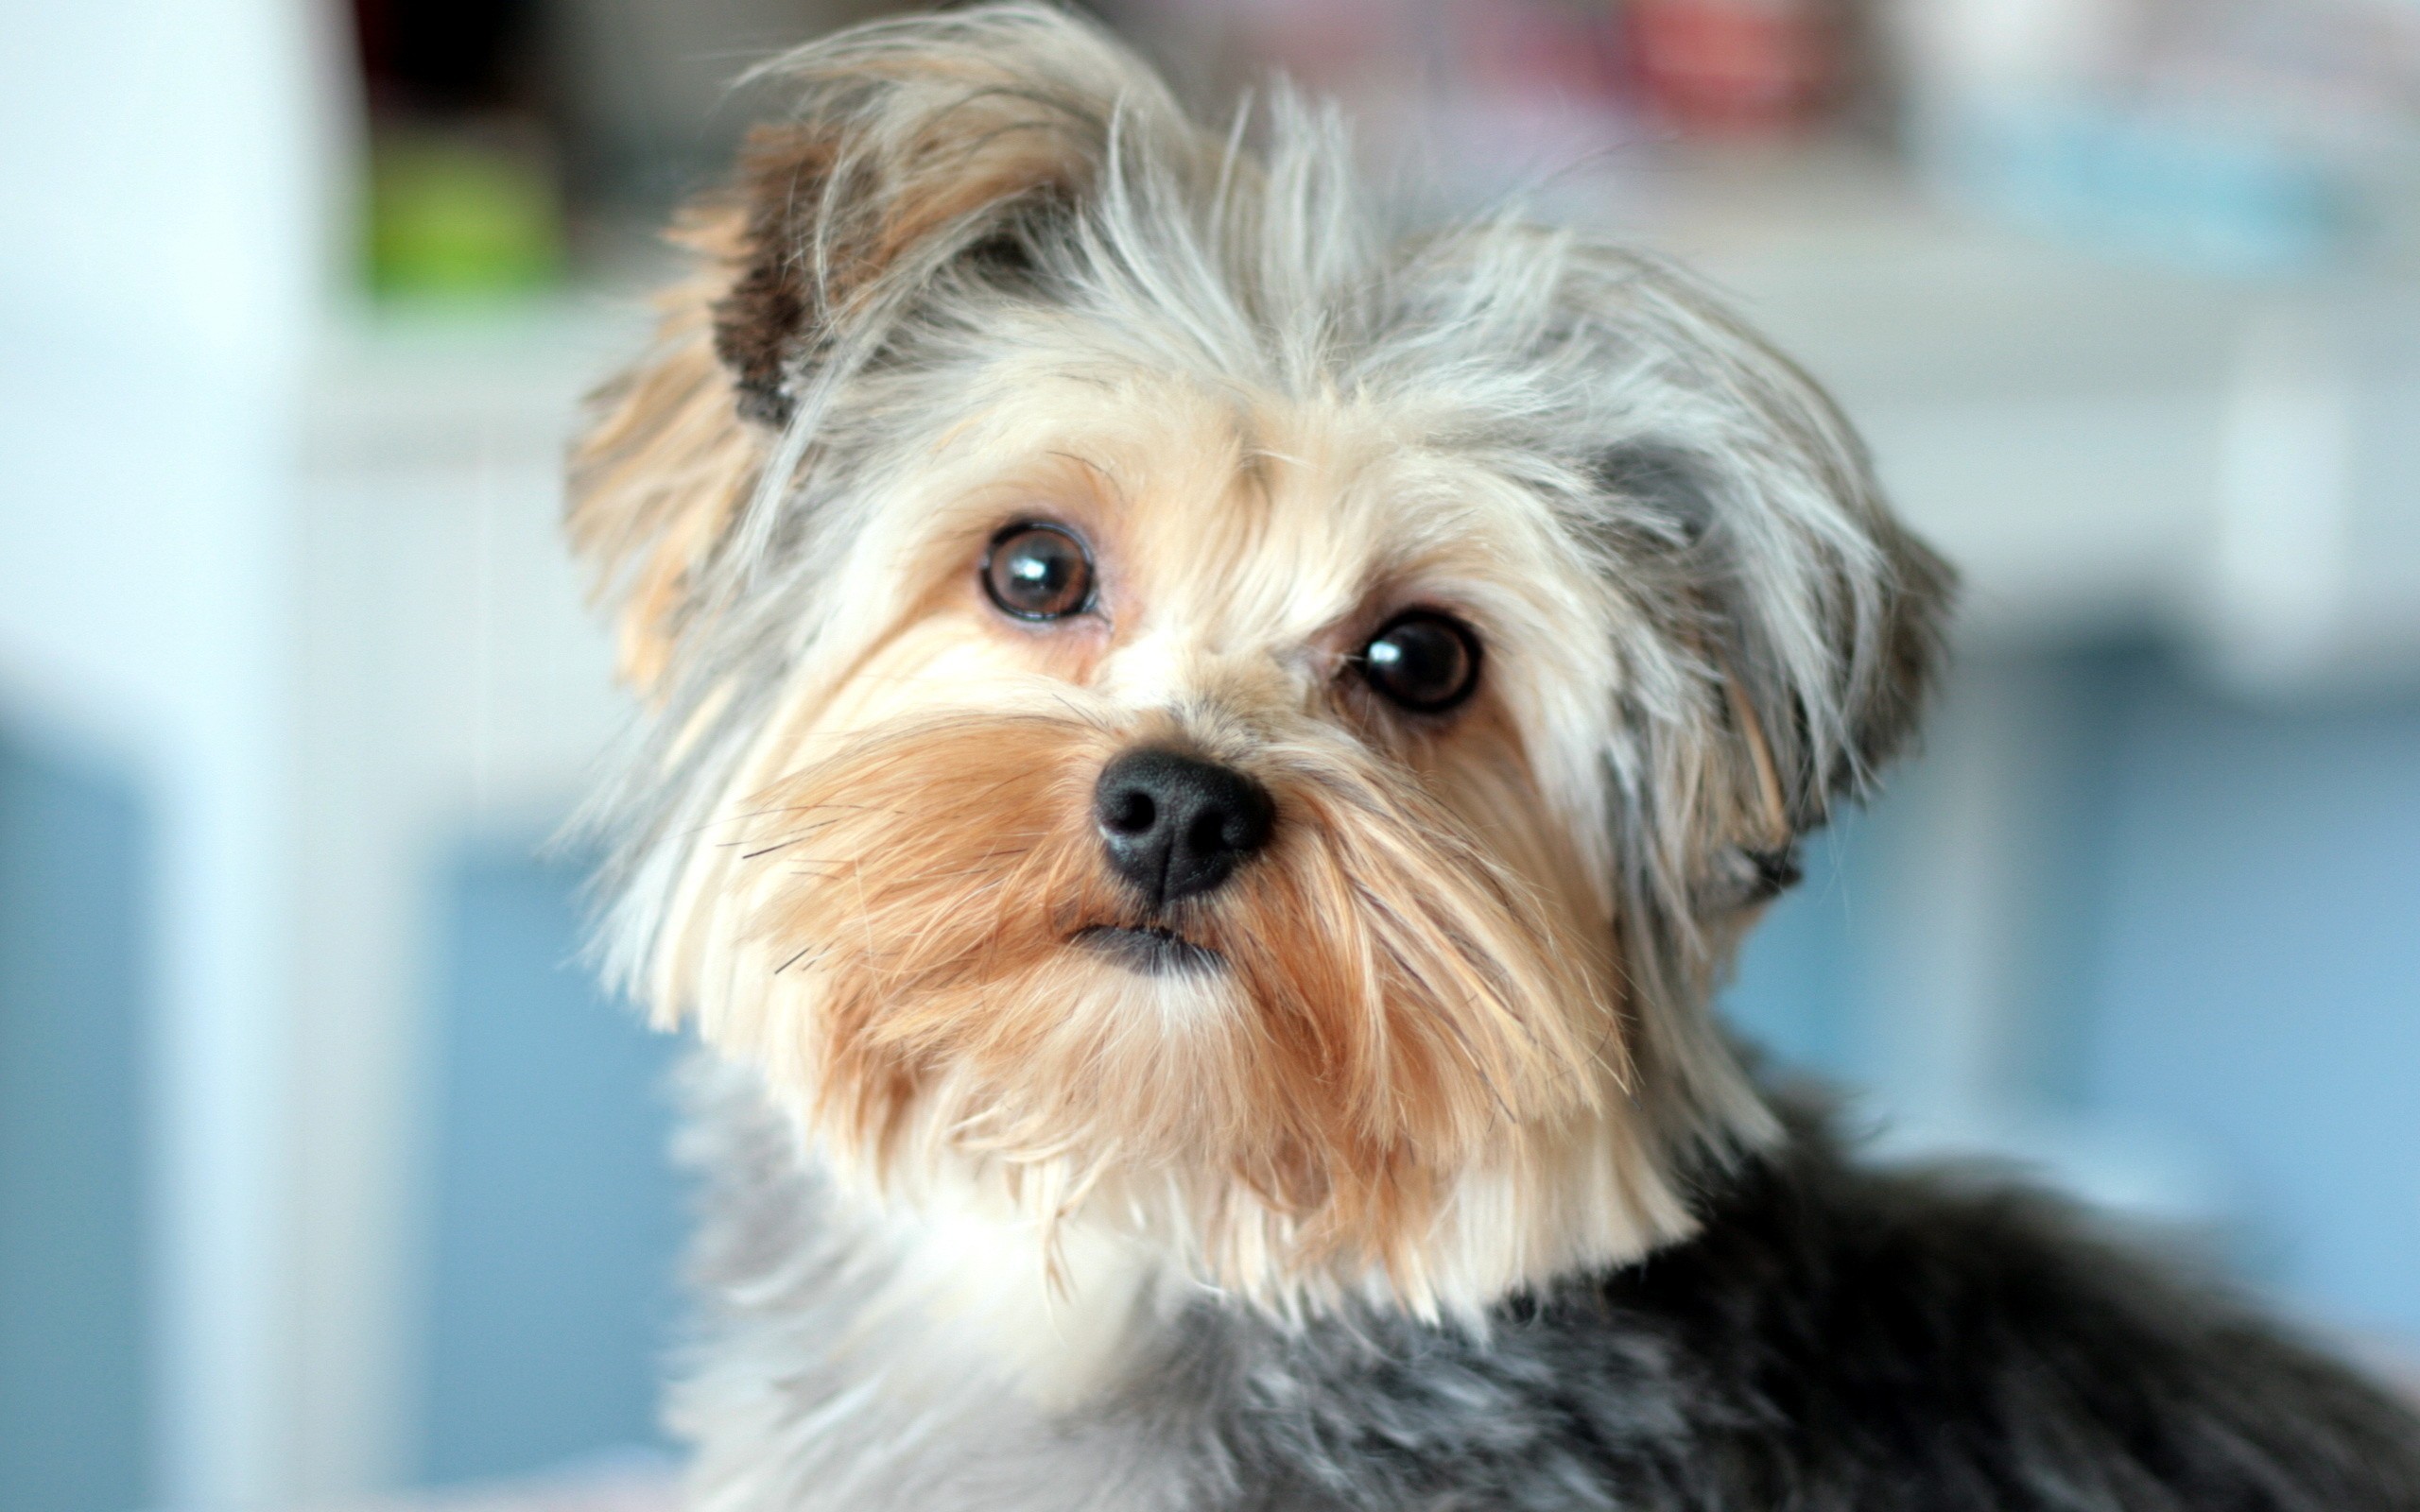 Dog Yorkshire Terrier wallpapers and images - wallpapers ...